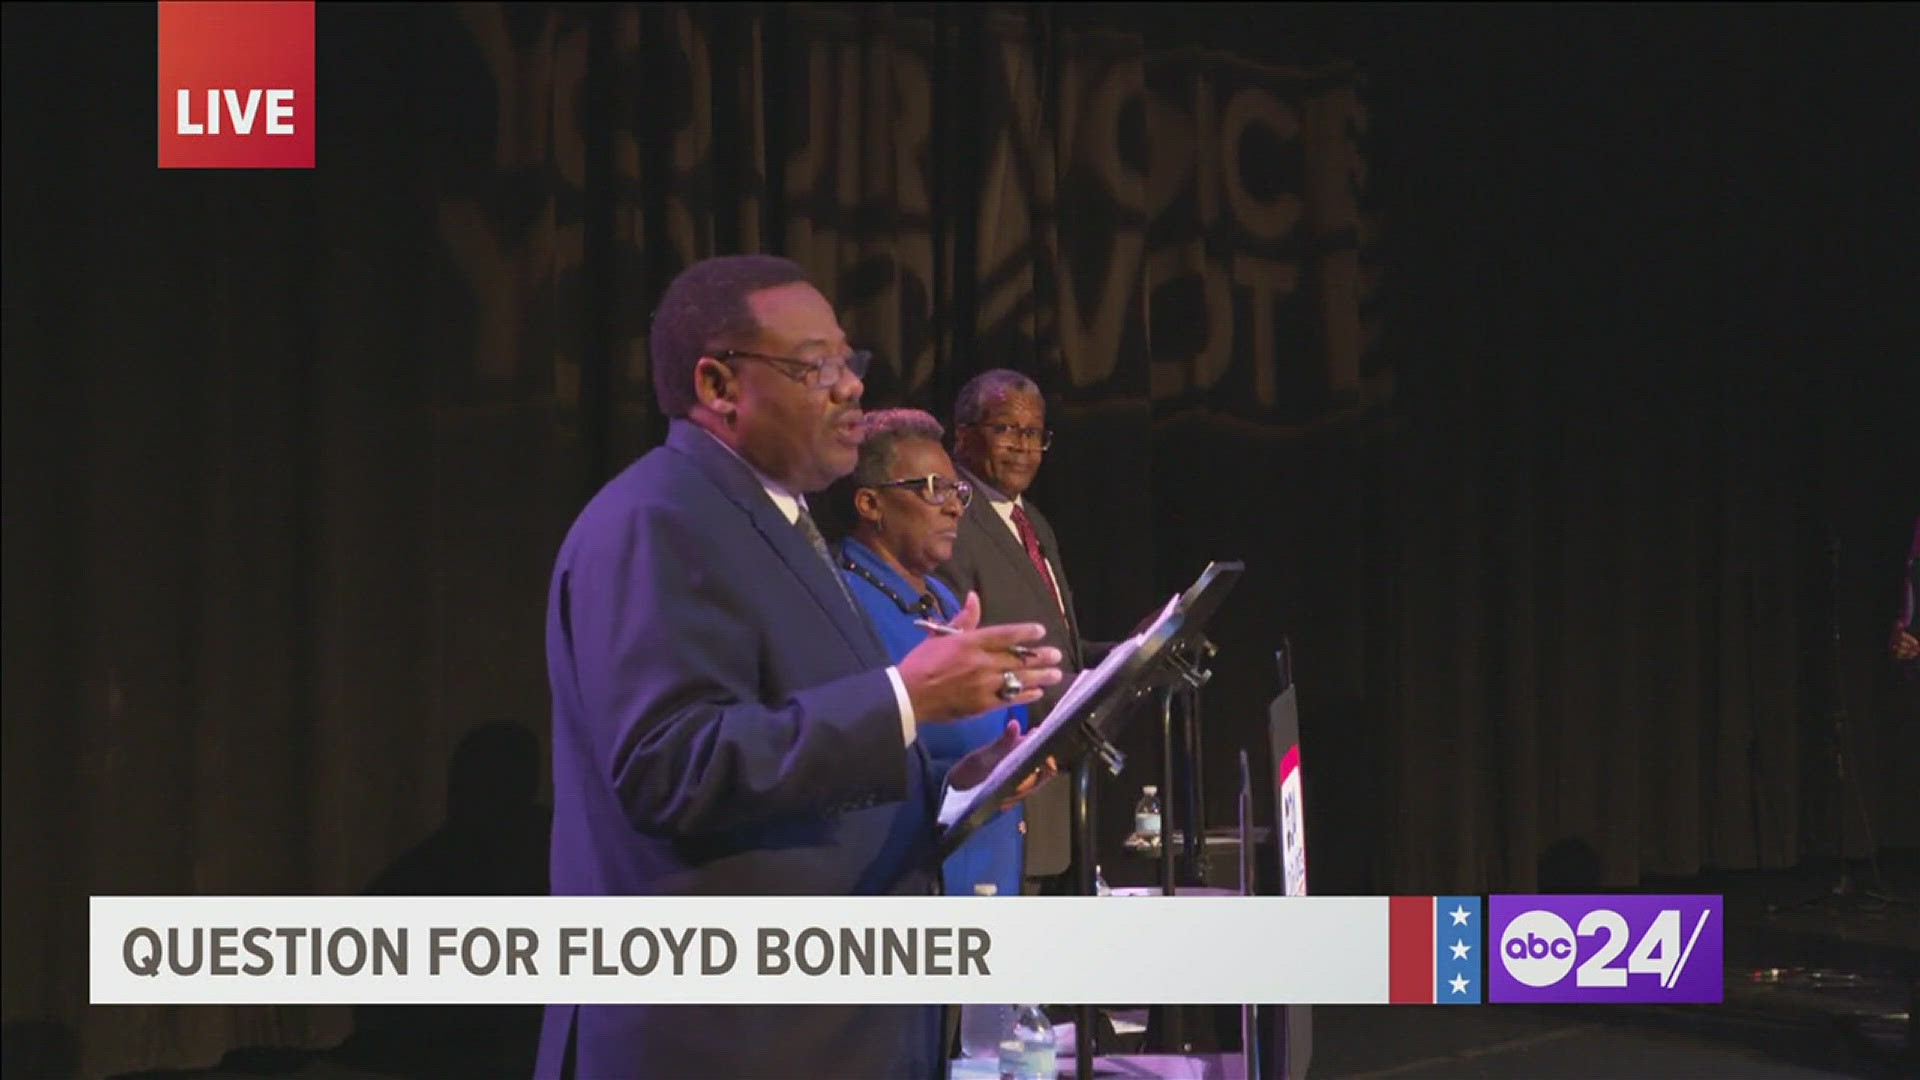 Memphis mayoral candidate and Shelby County Sheriff Floyd Bonner speaks to criticisms regarding 44 deaths that have taken place in jail since he became sheriff.